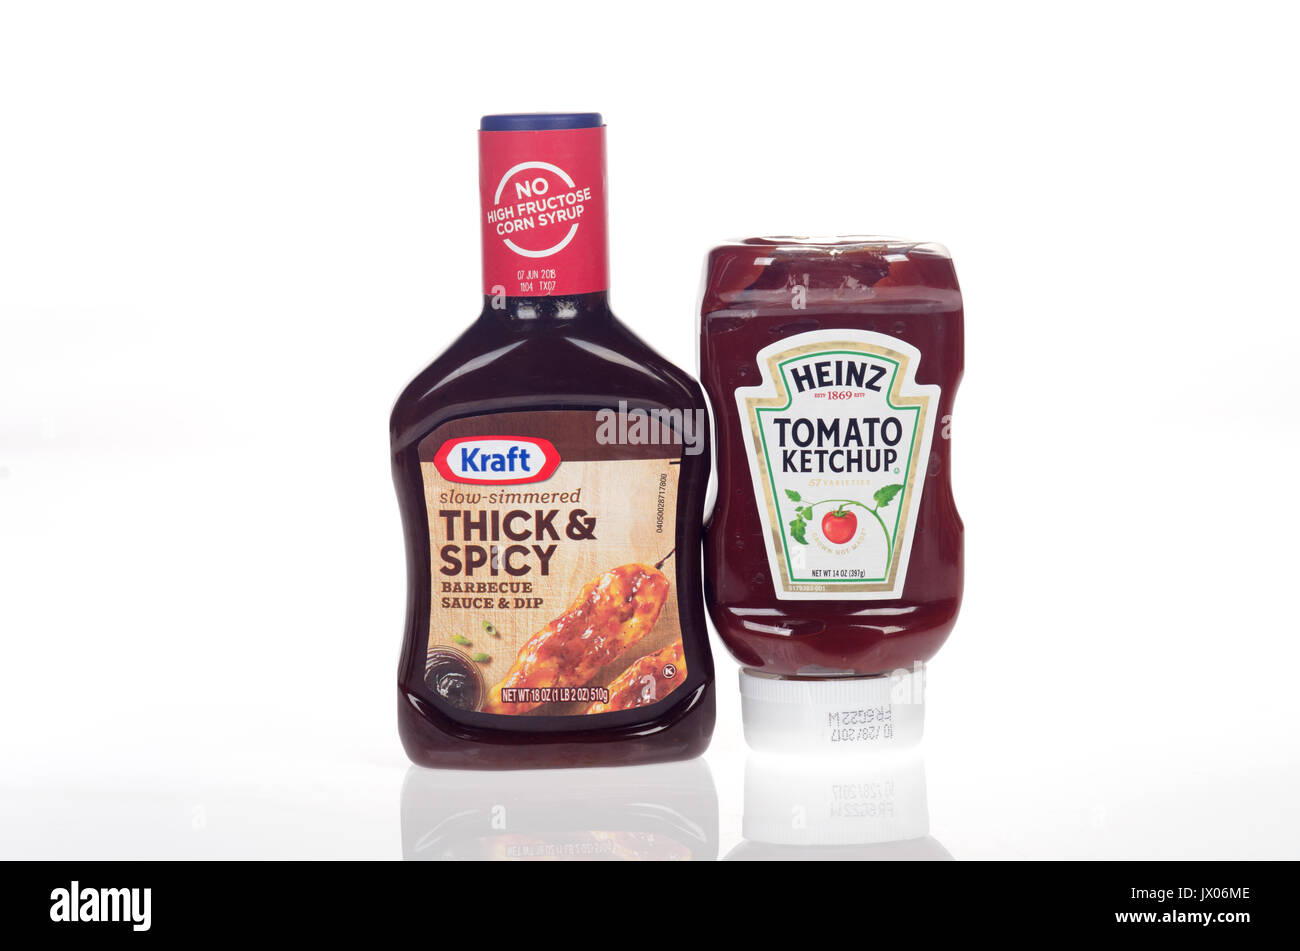 Bottle of Kraft bbq sauce with bottle of Heinz ketchup on white background, cut-out. USA Stock Photo -